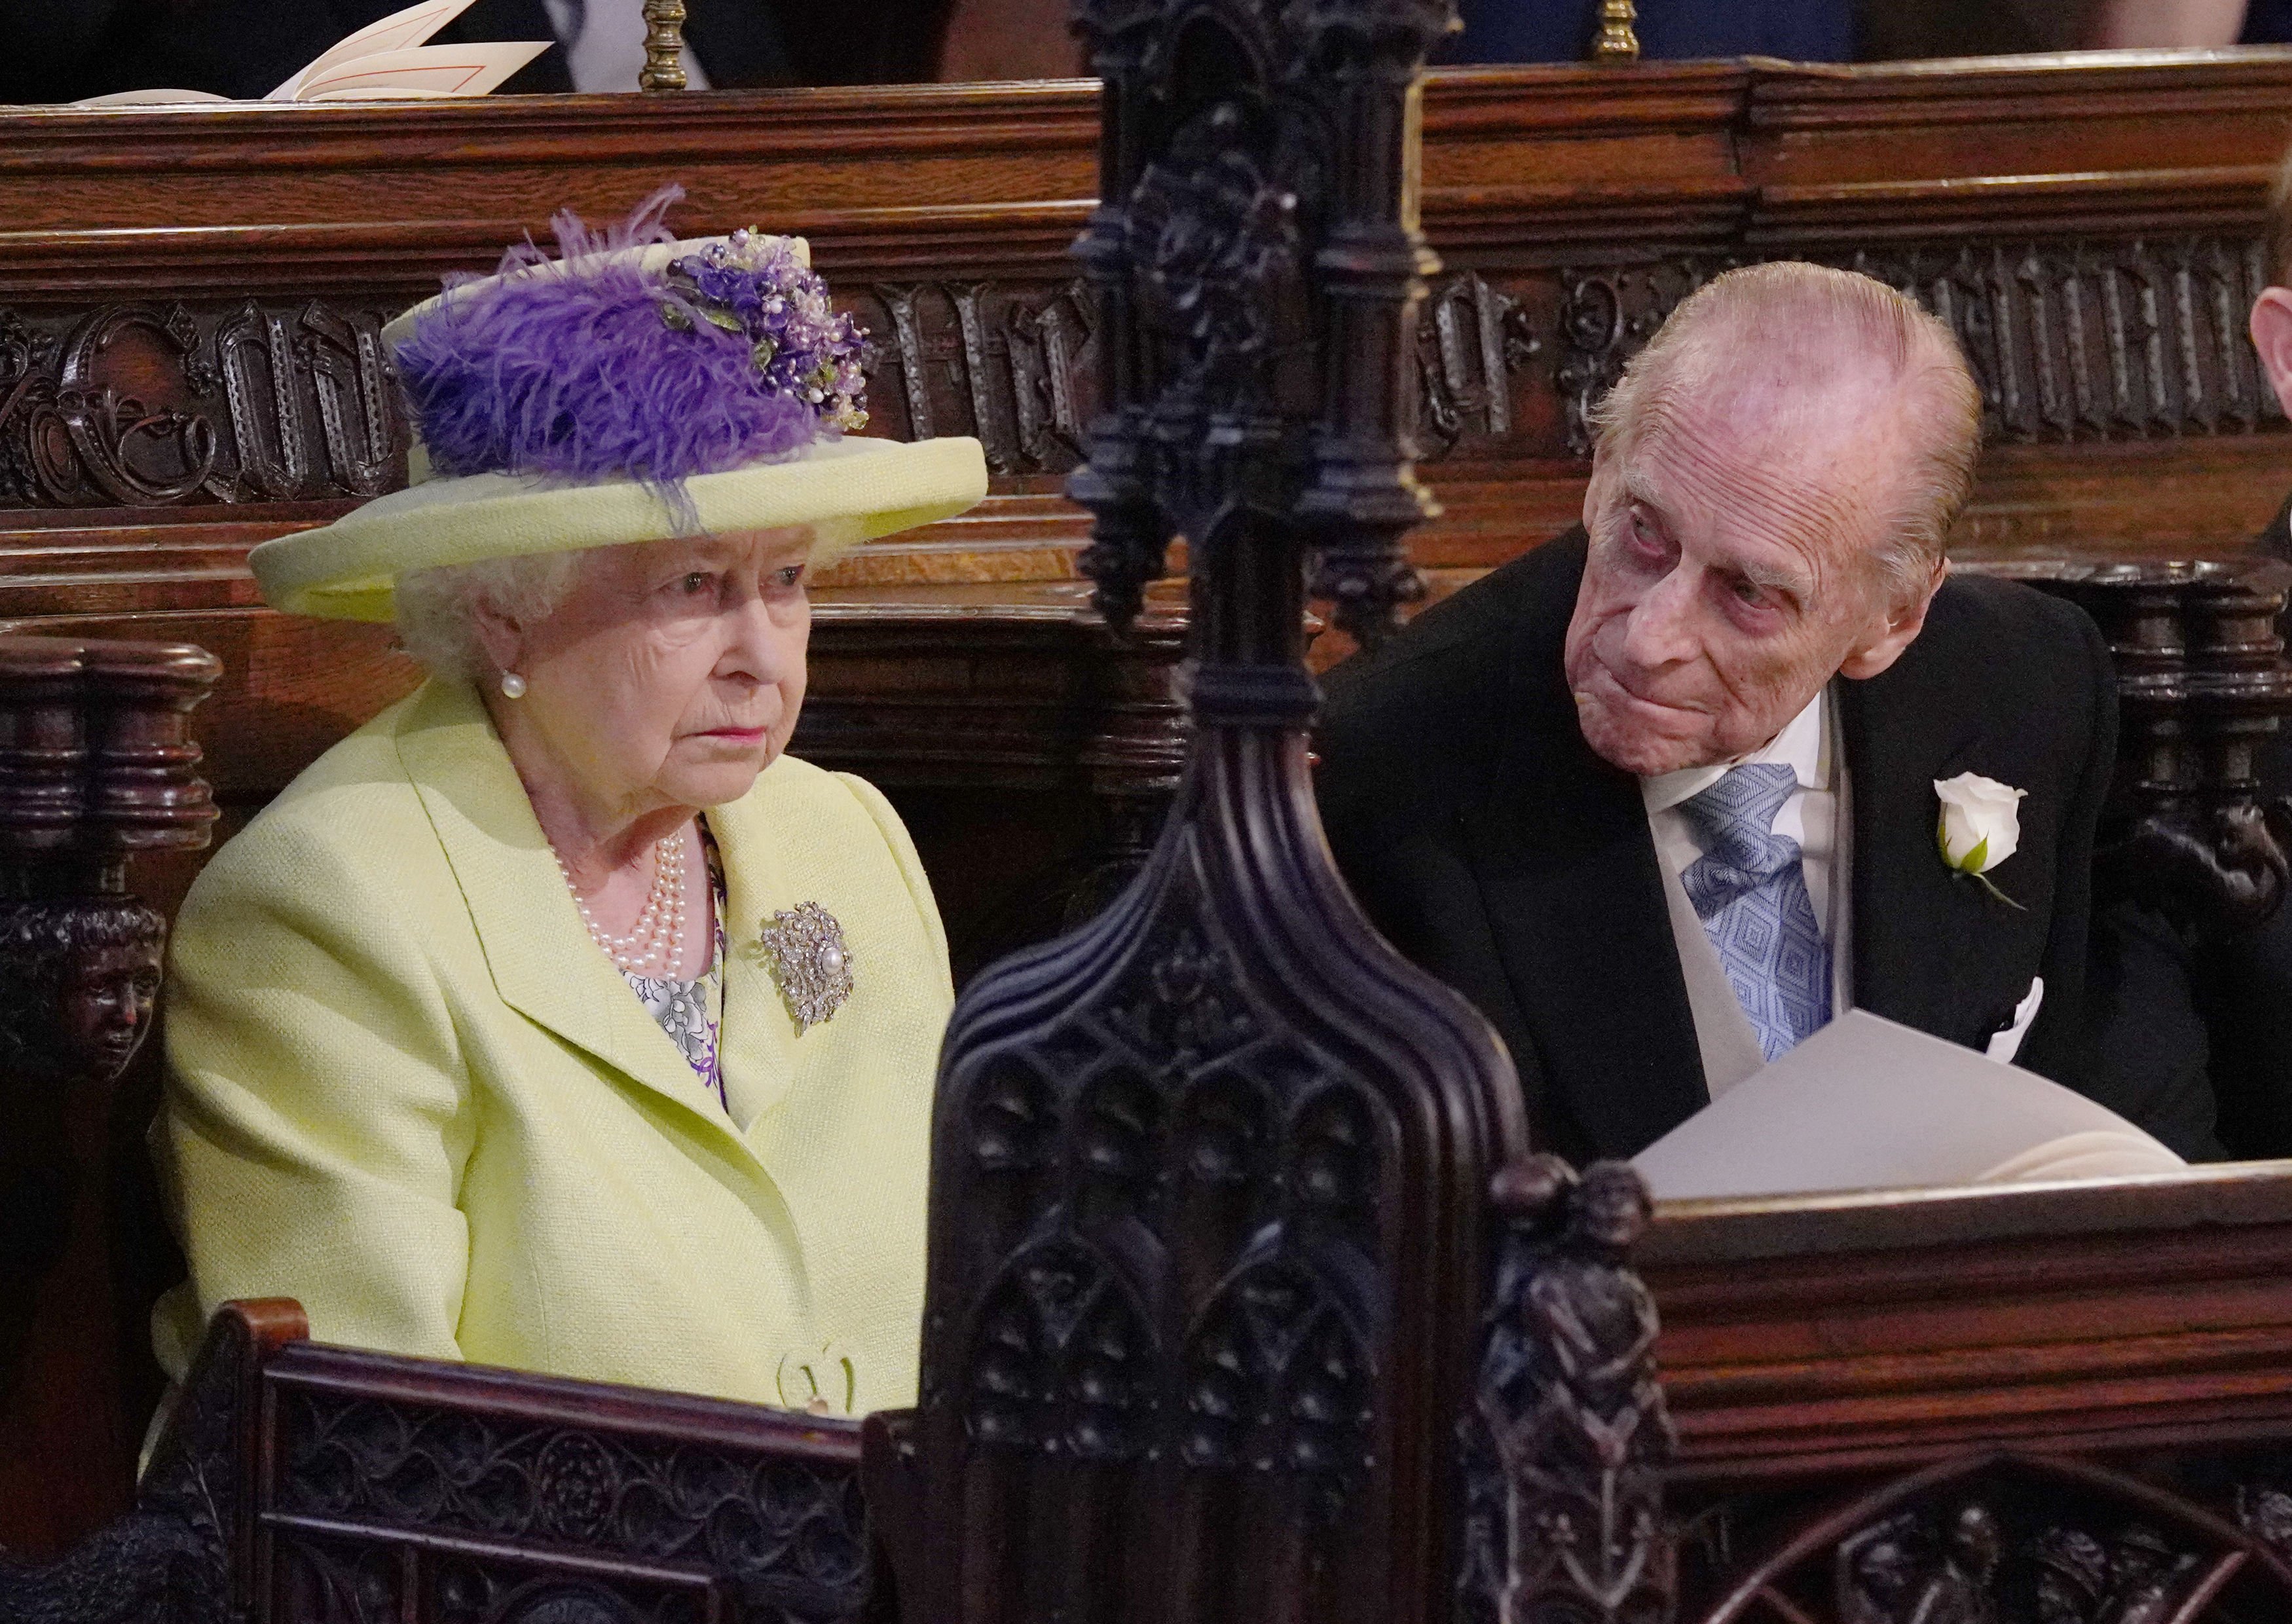 Britain's Queen Elizabeth II and Britain's Prince Philip, Duke of Edinburgh (R) during the wedding ceremony of Britain's Prince Harry, Duke of Sussex and US actress Meghan Markle in St George's Chapel, Windsor Castle, in Windsor, on May 19, 2018 | Source: Getty Images